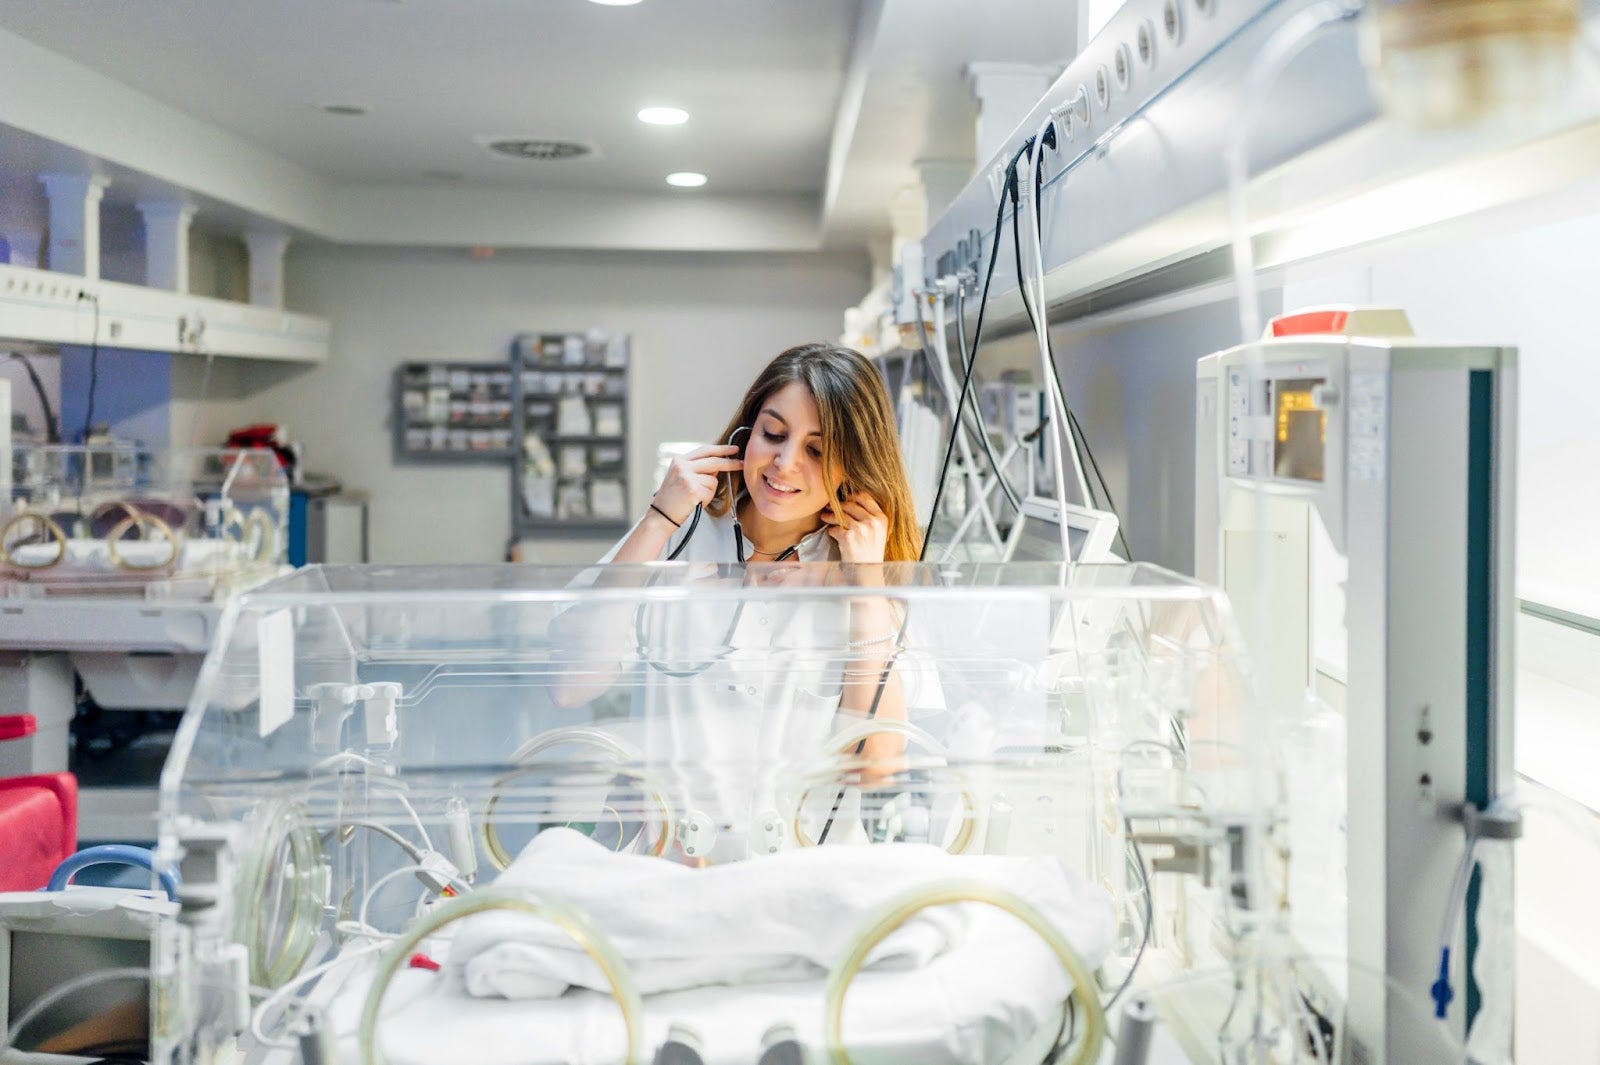 Family Nurse Practitioner puts on stethoscope in front of incubator with baby inside